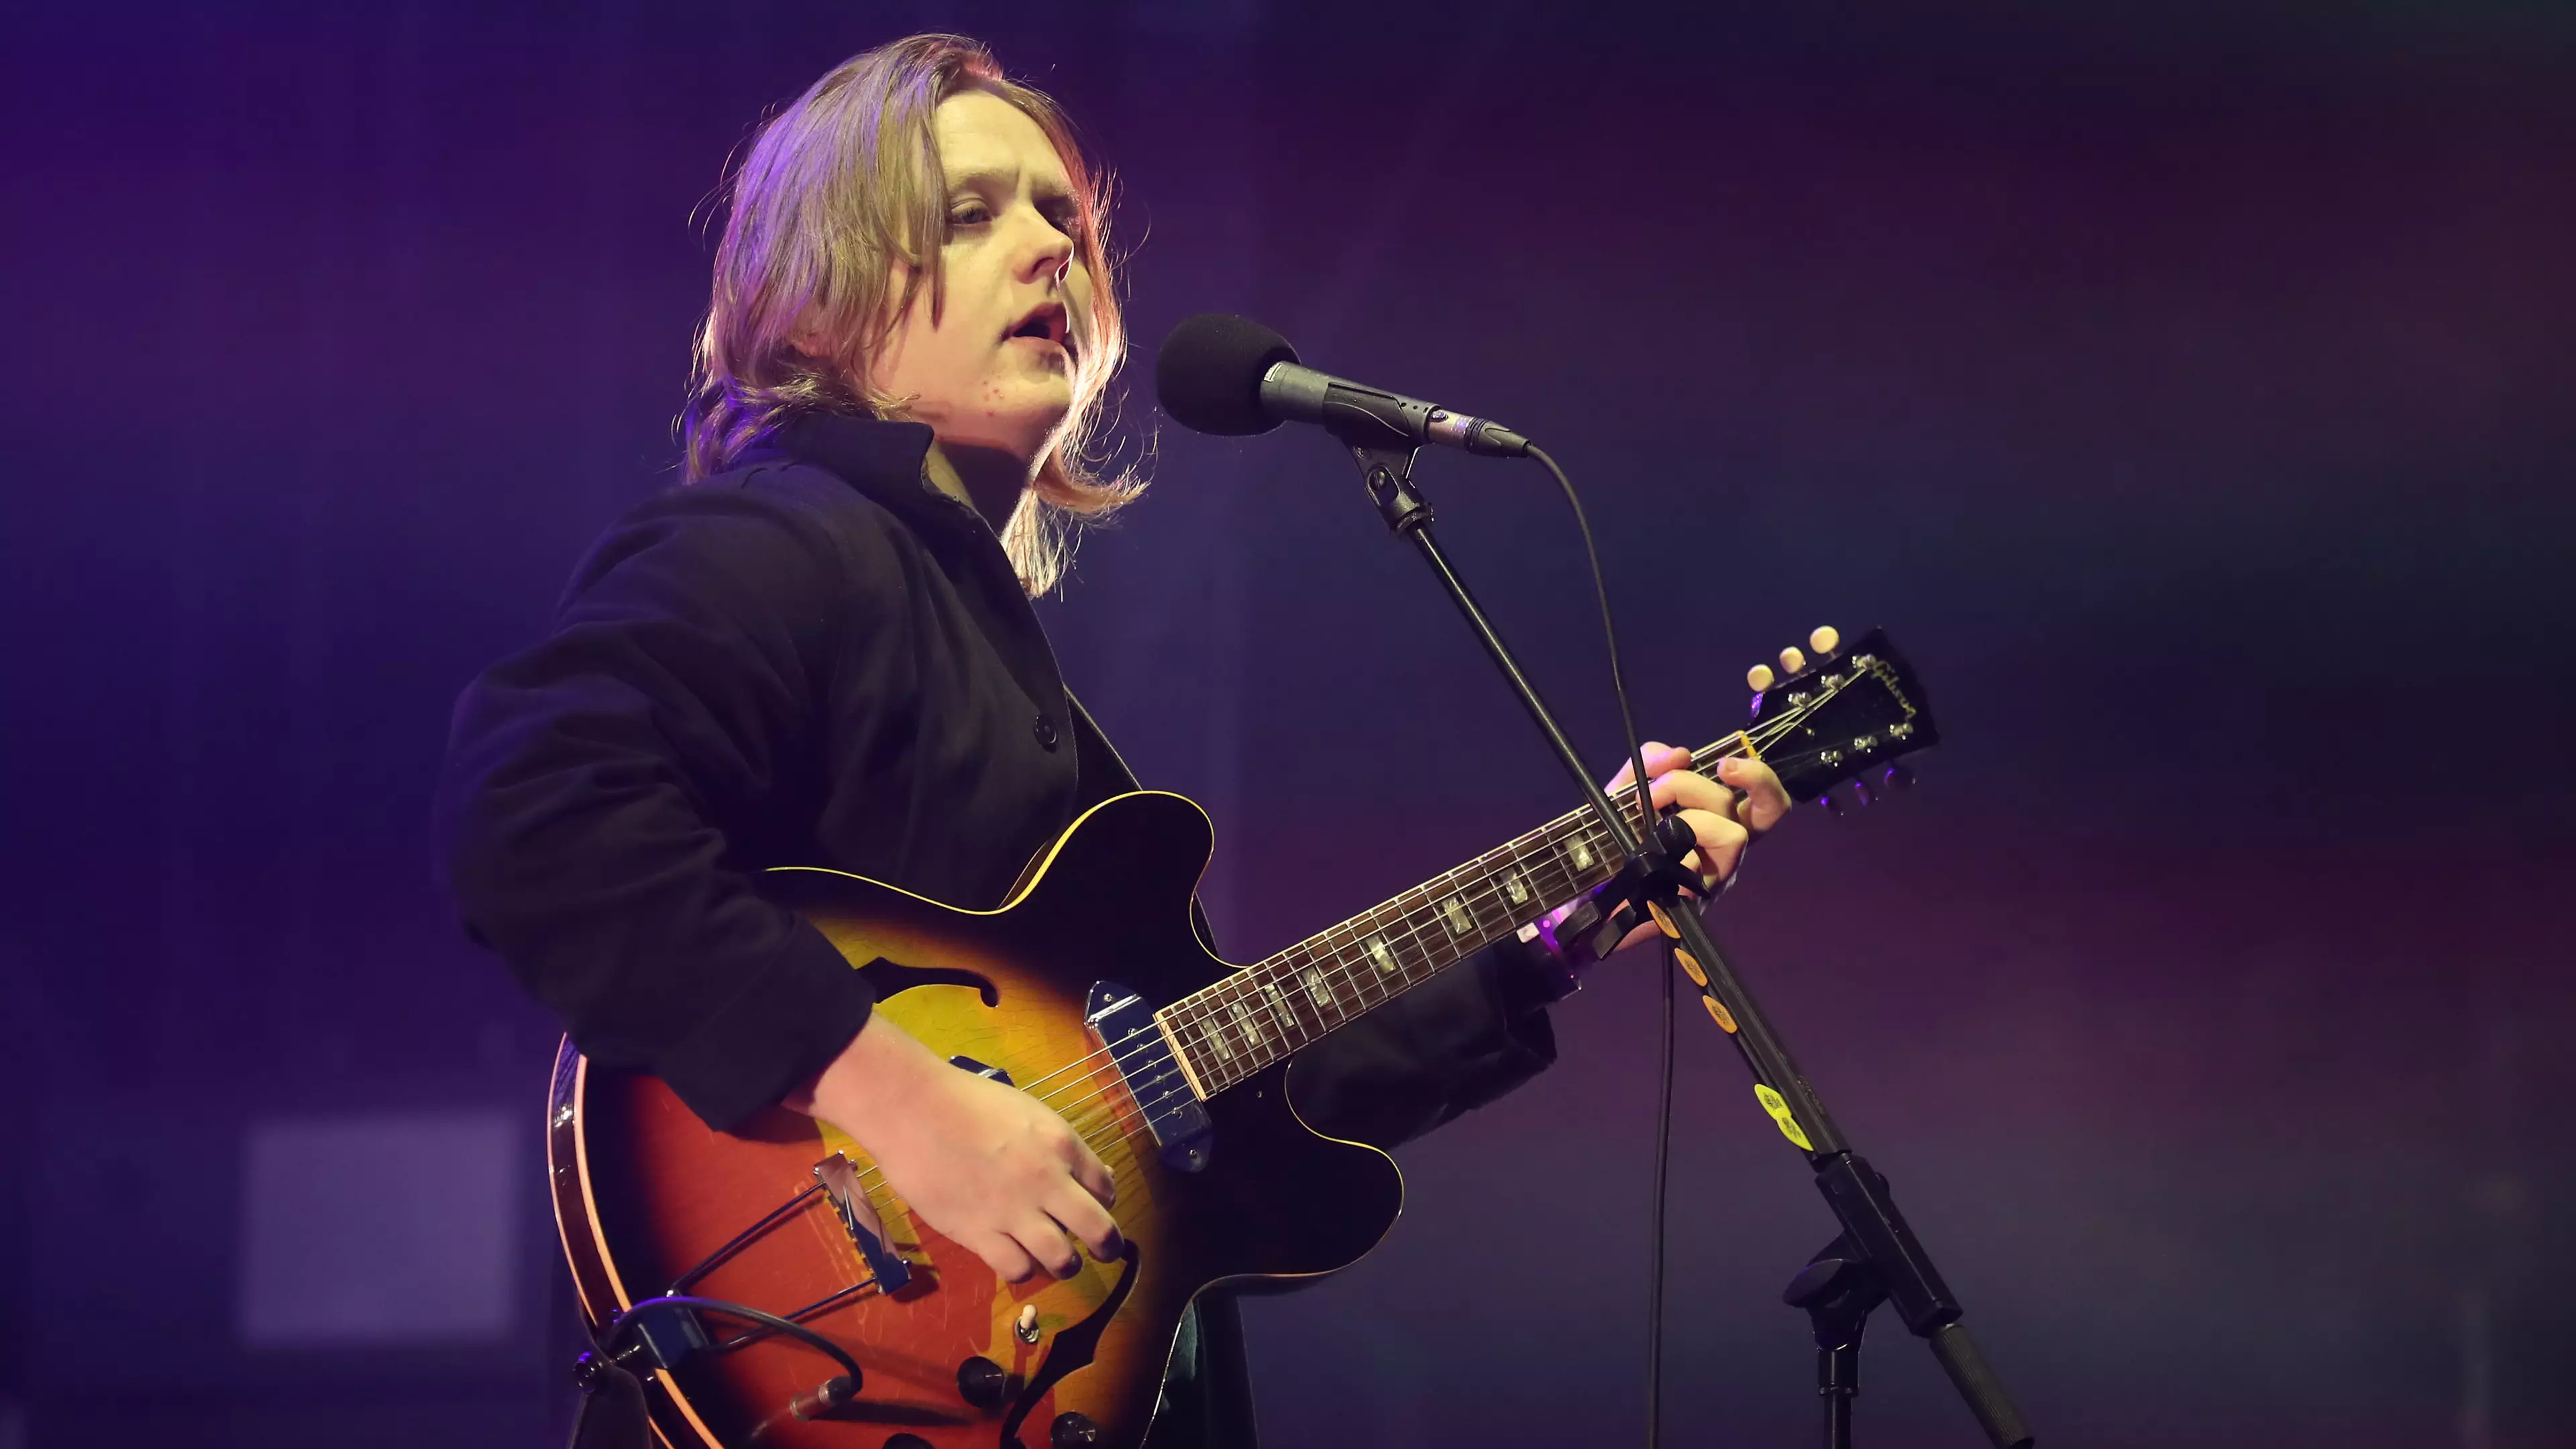 Lewis Capaldi Wants To Help Fans Suffering From Anxiety At His Shows